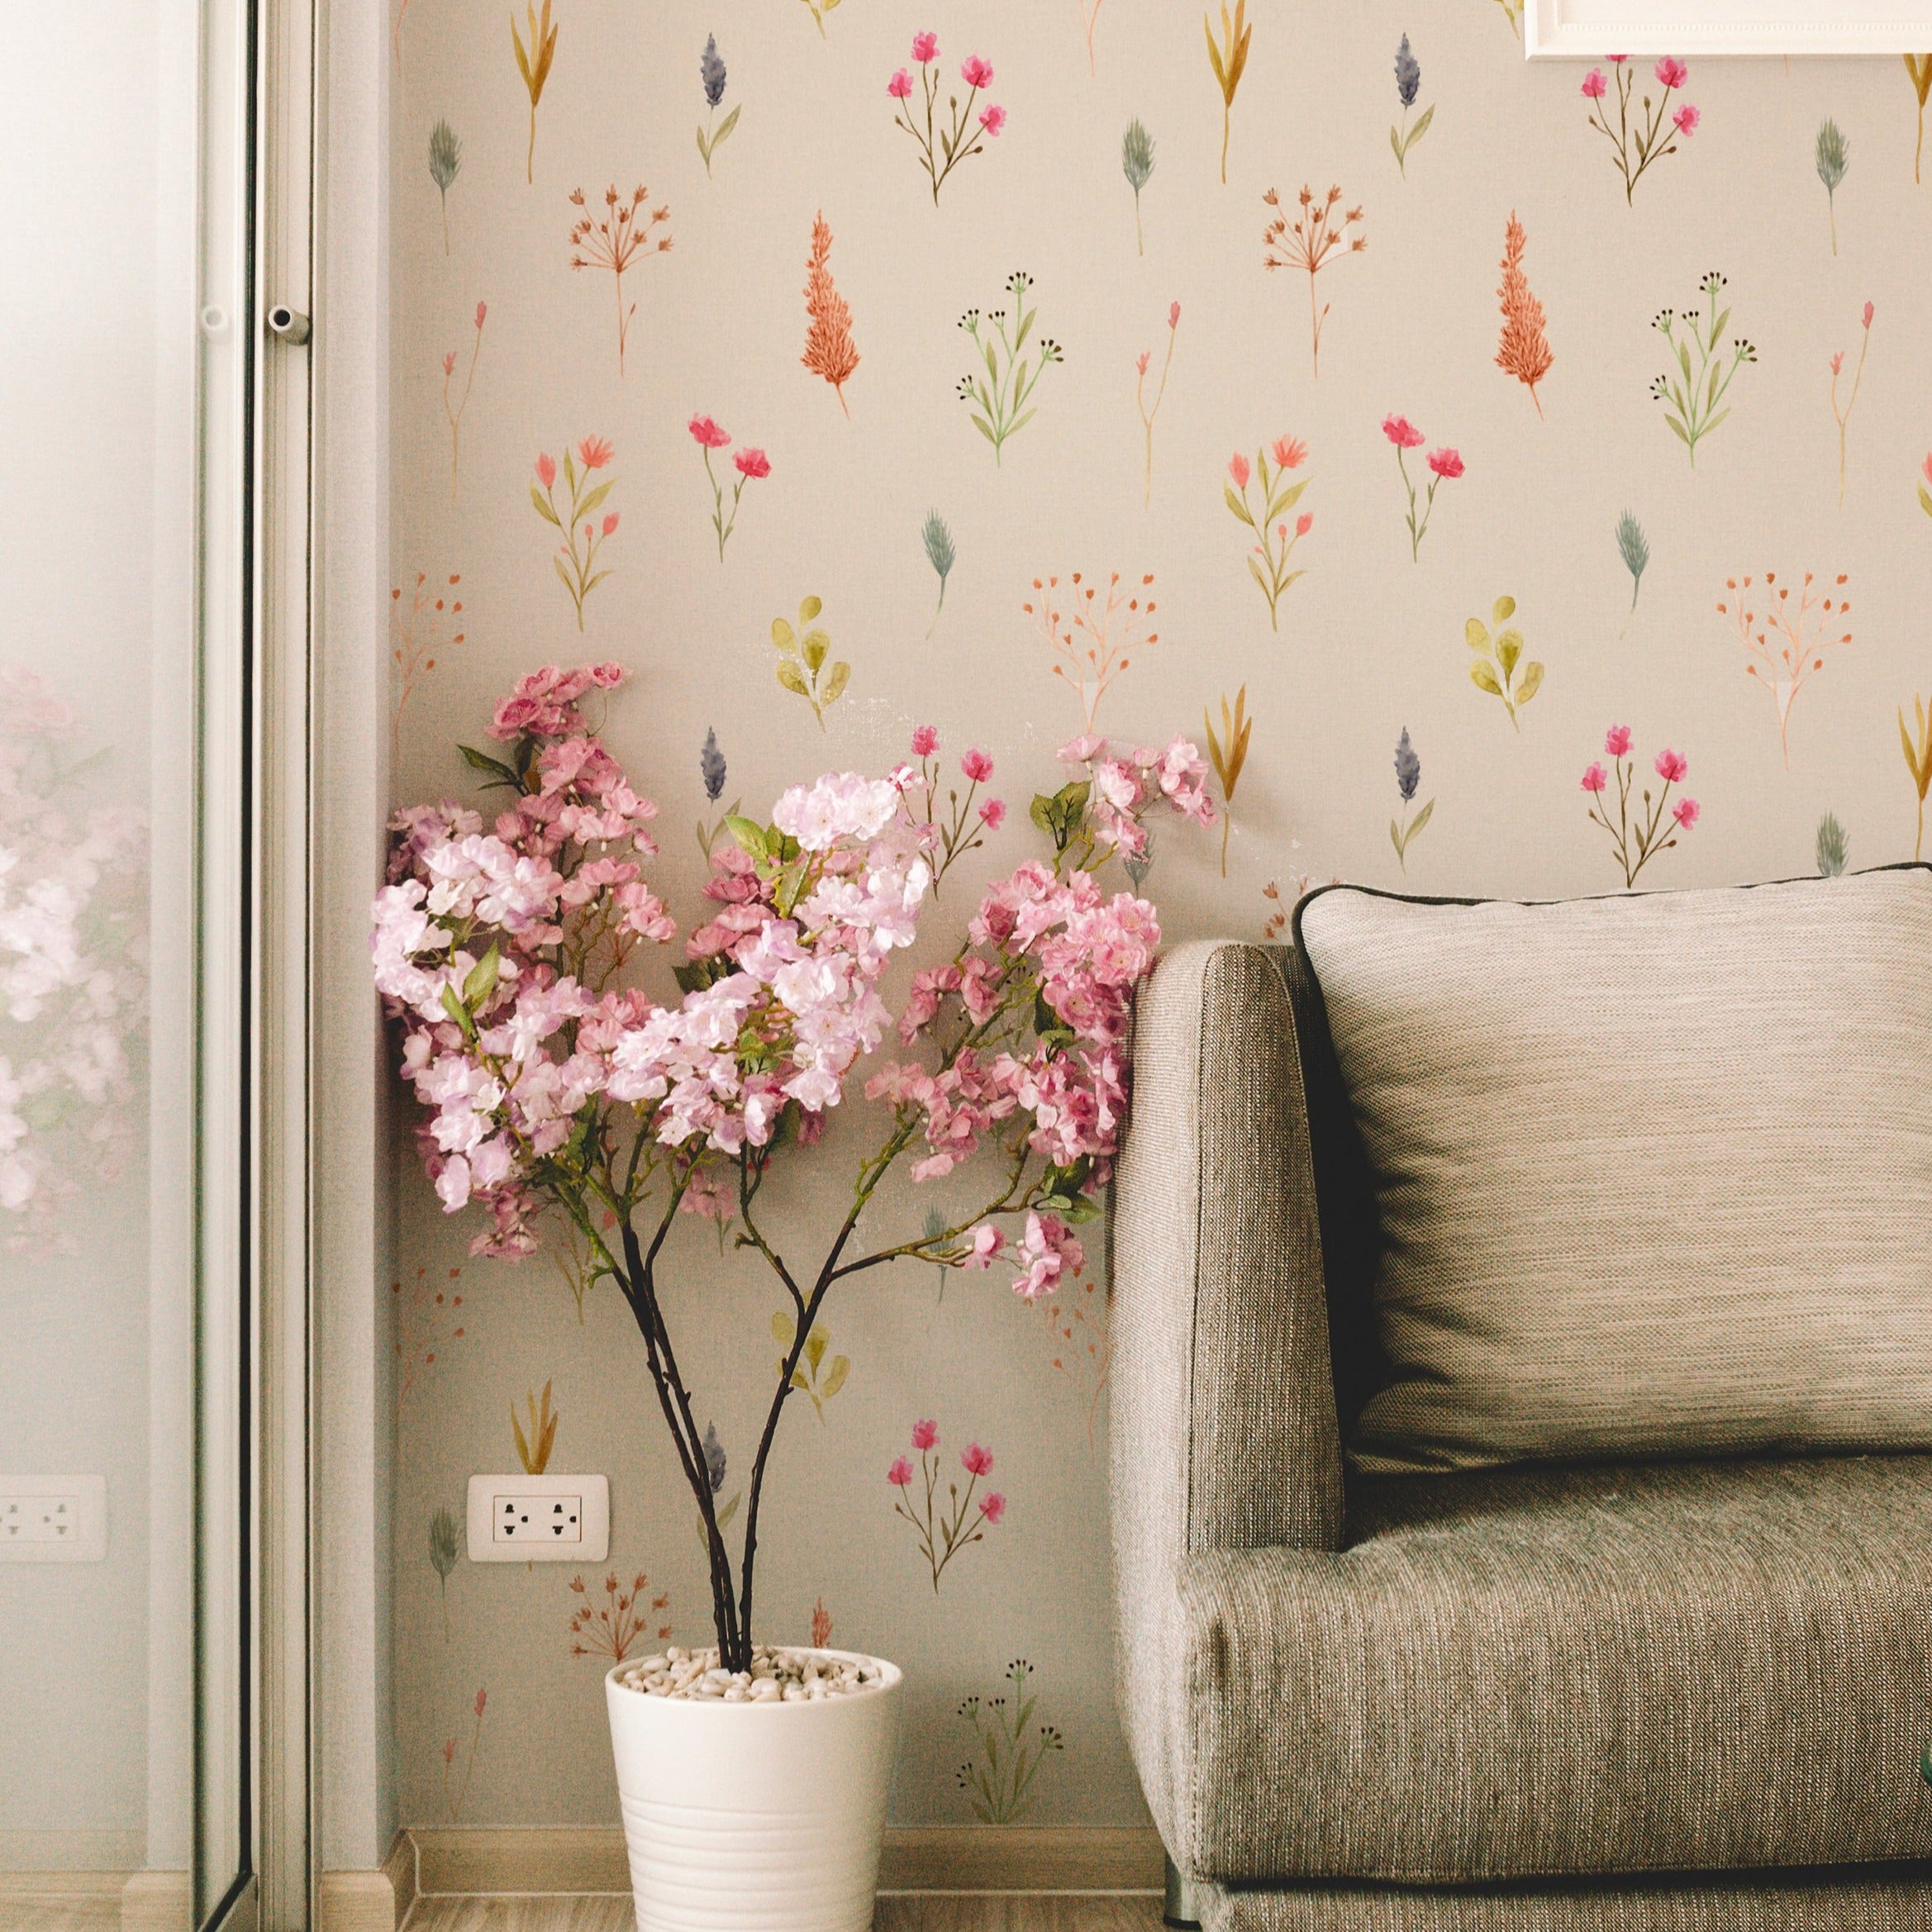 A stylish living area where a plush grey sofa is set against the Watercolour Floral Wallpaper II, with vibrant pink blossoms in a white pot complementing the wallpaper's floral motif, enhancing the room's elegance and botanical charm.